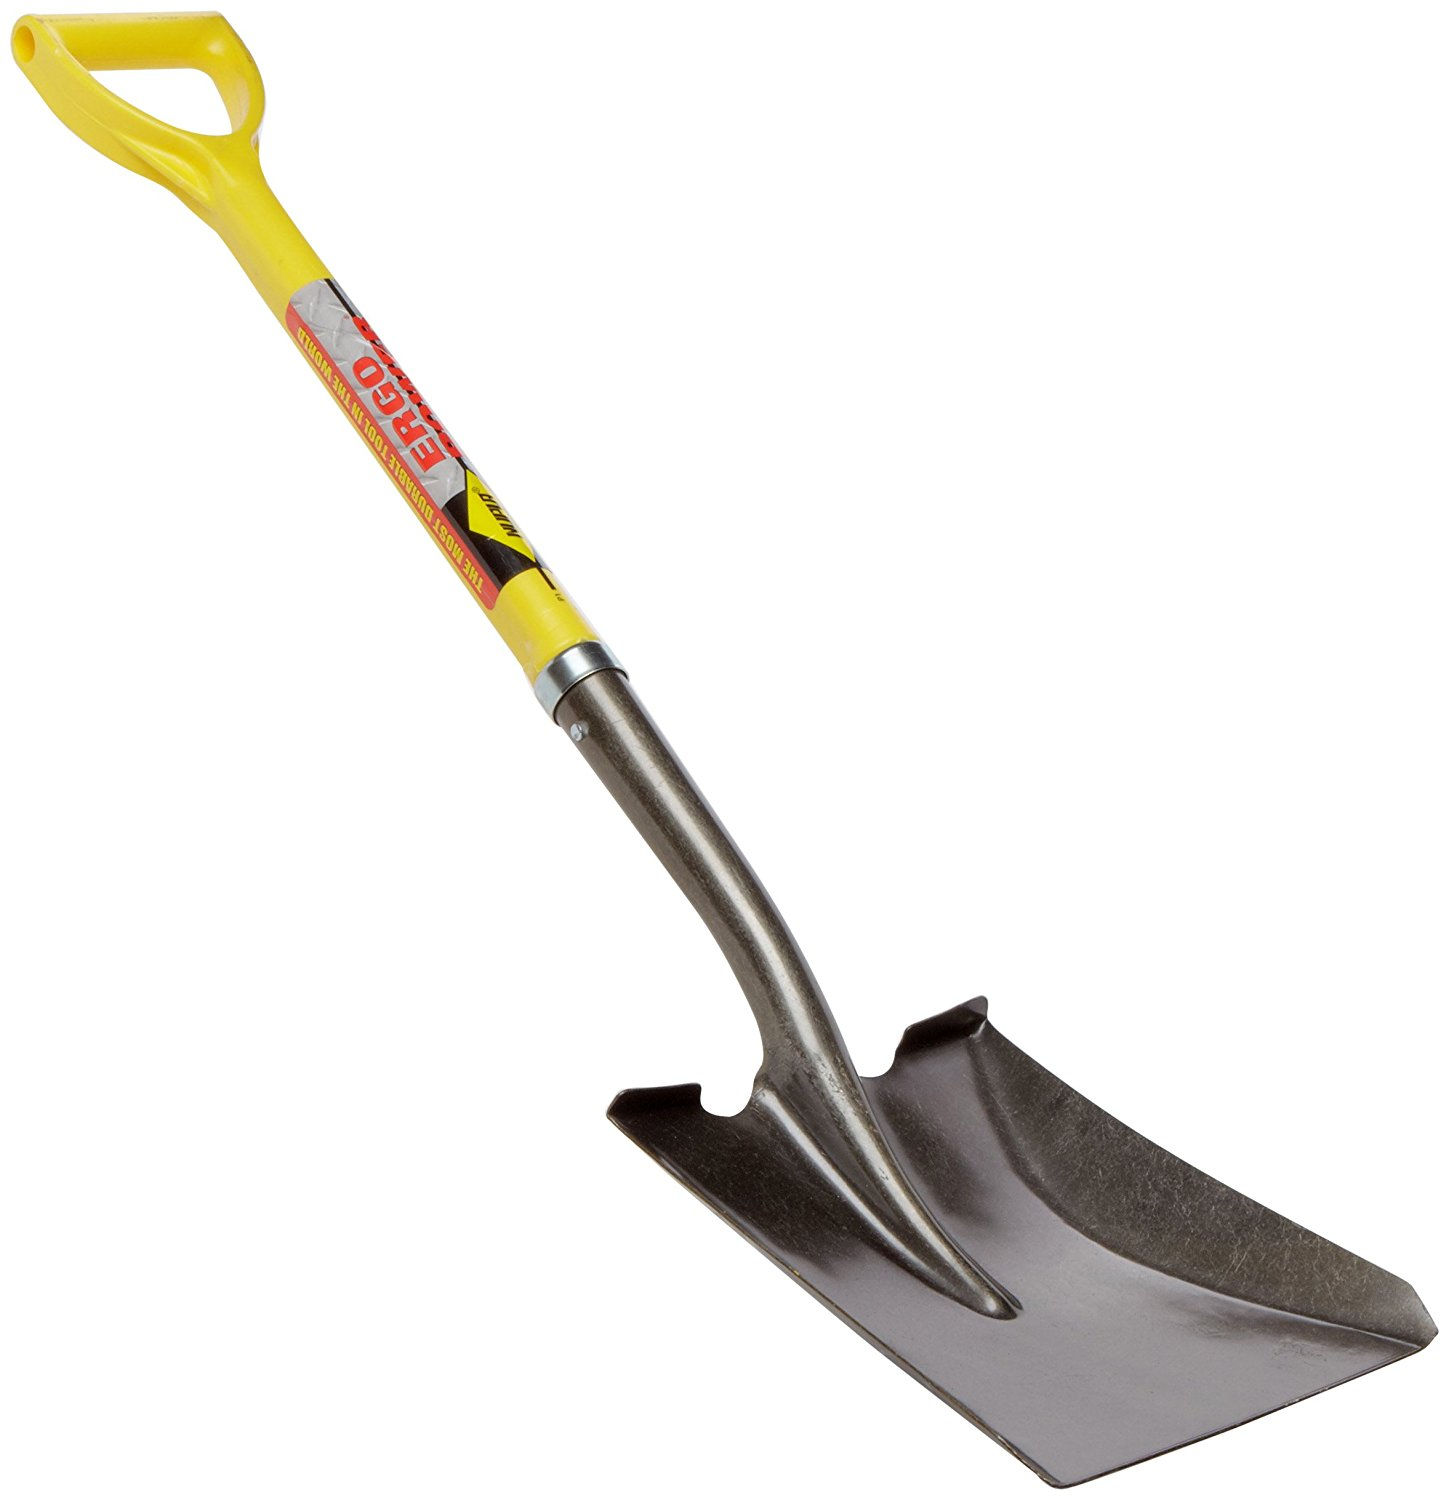 11 Different Types of Shovels for Every Digging Need